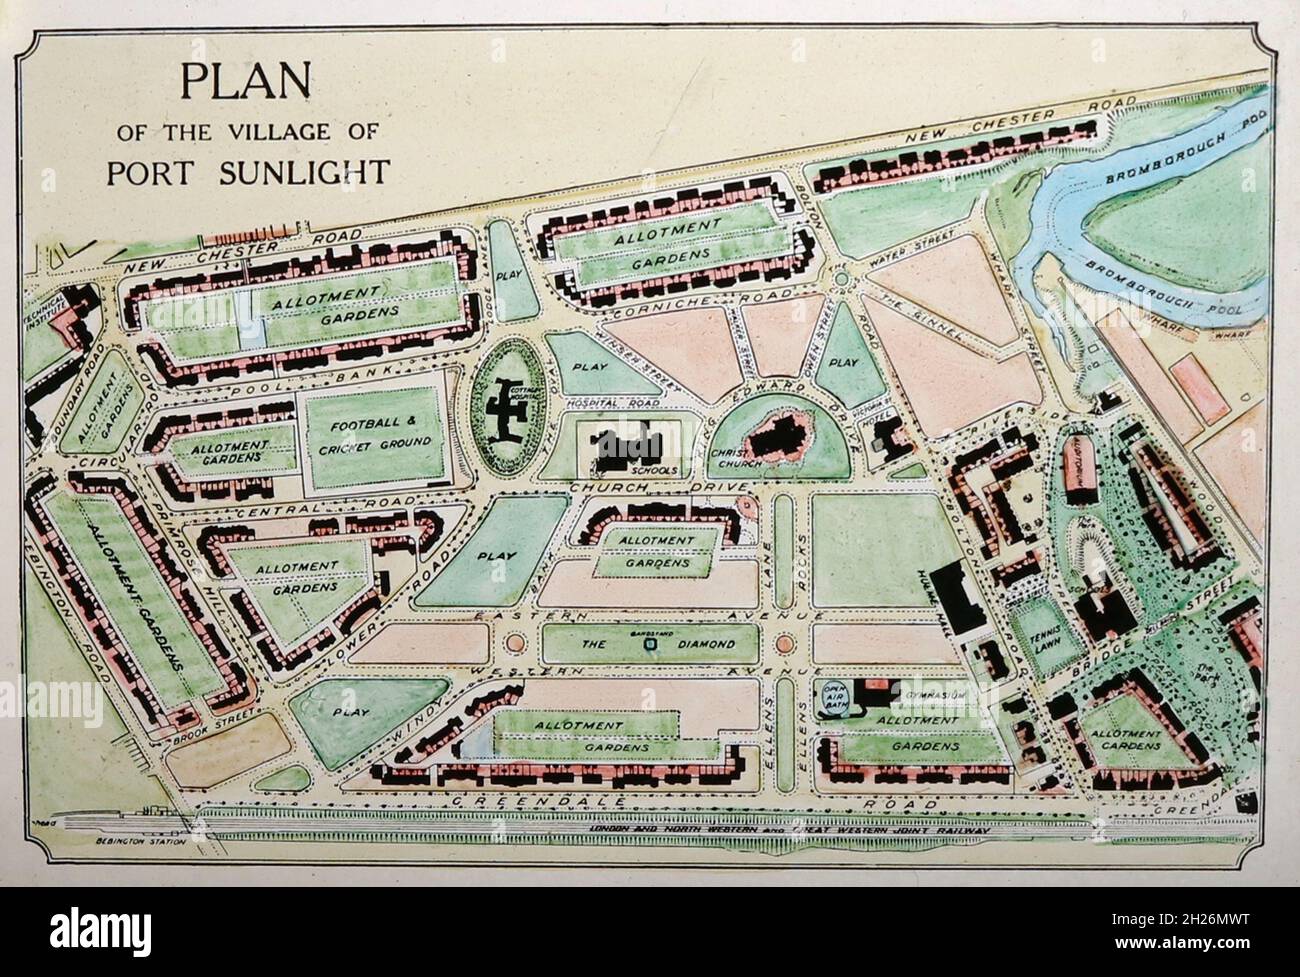 Port Sunlight Village plan, Wirral, early 1900s Stock Photo